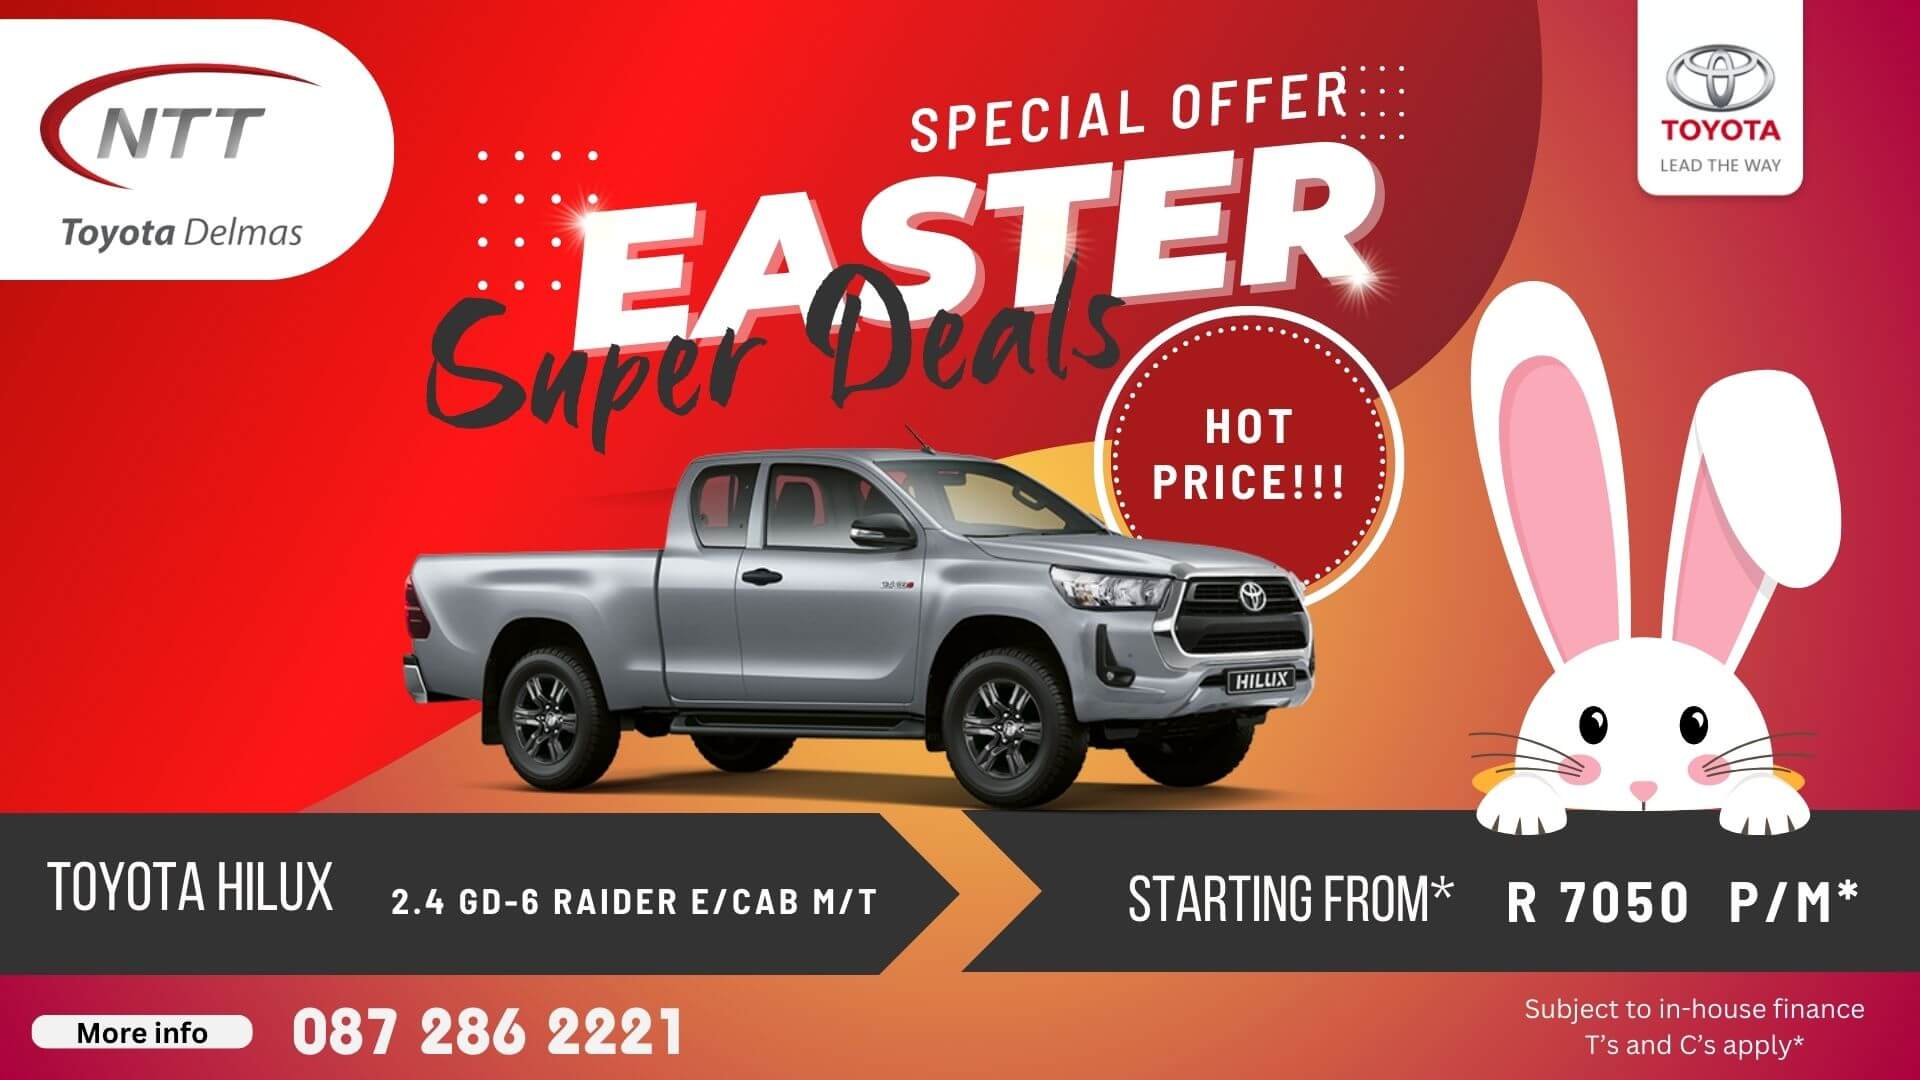 TOYOTA HILUX 2.4 GD-6 RAIDER  - NTT Toyota - New, Used & Demo Cars for Sale in South Africa